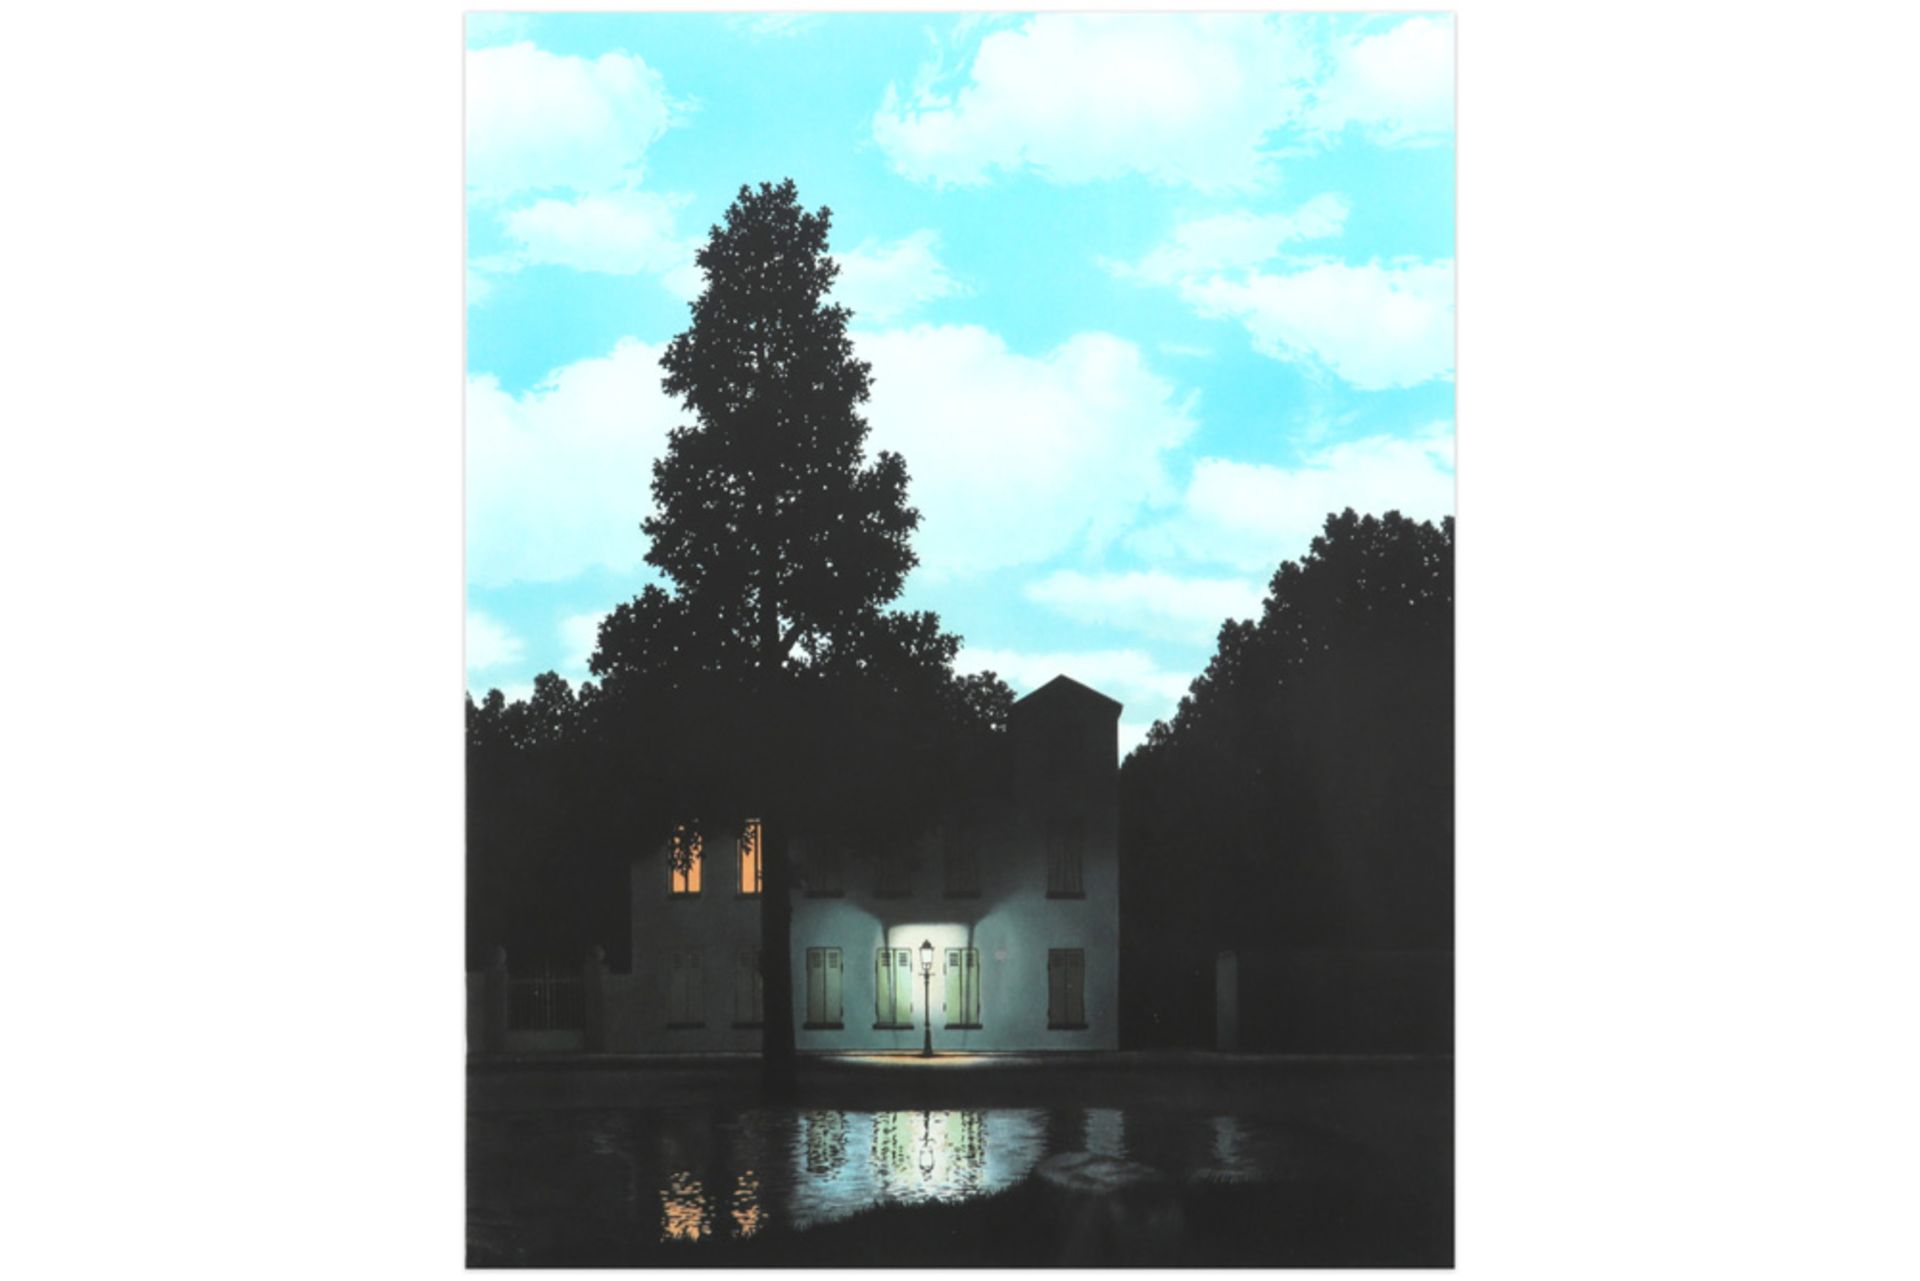 René Magritte "L'Empire des lumières" offset lithograph printed in colors - with stamped signature